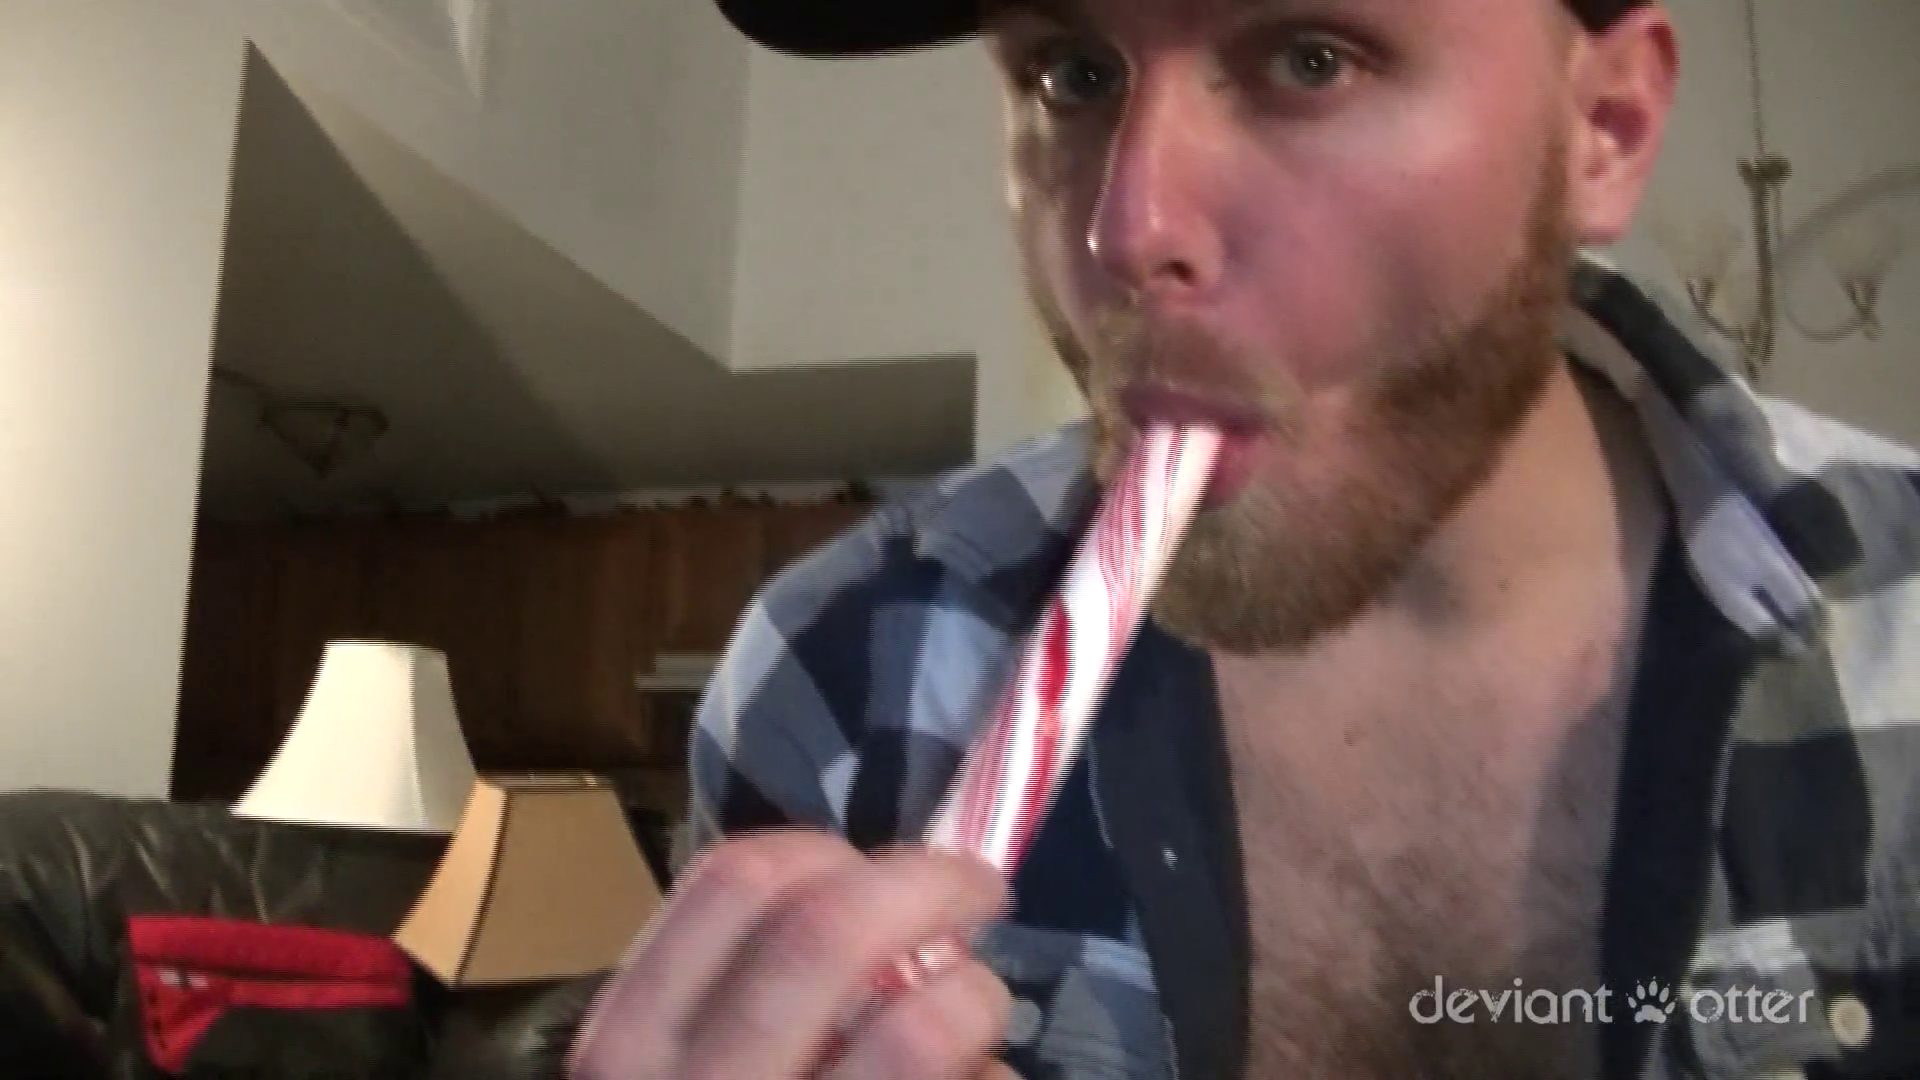 Devin Totter fucks Jameson and double penetrates his hairy hole with a candy cane in the Christmas special for gay porn site Deviant Otter.